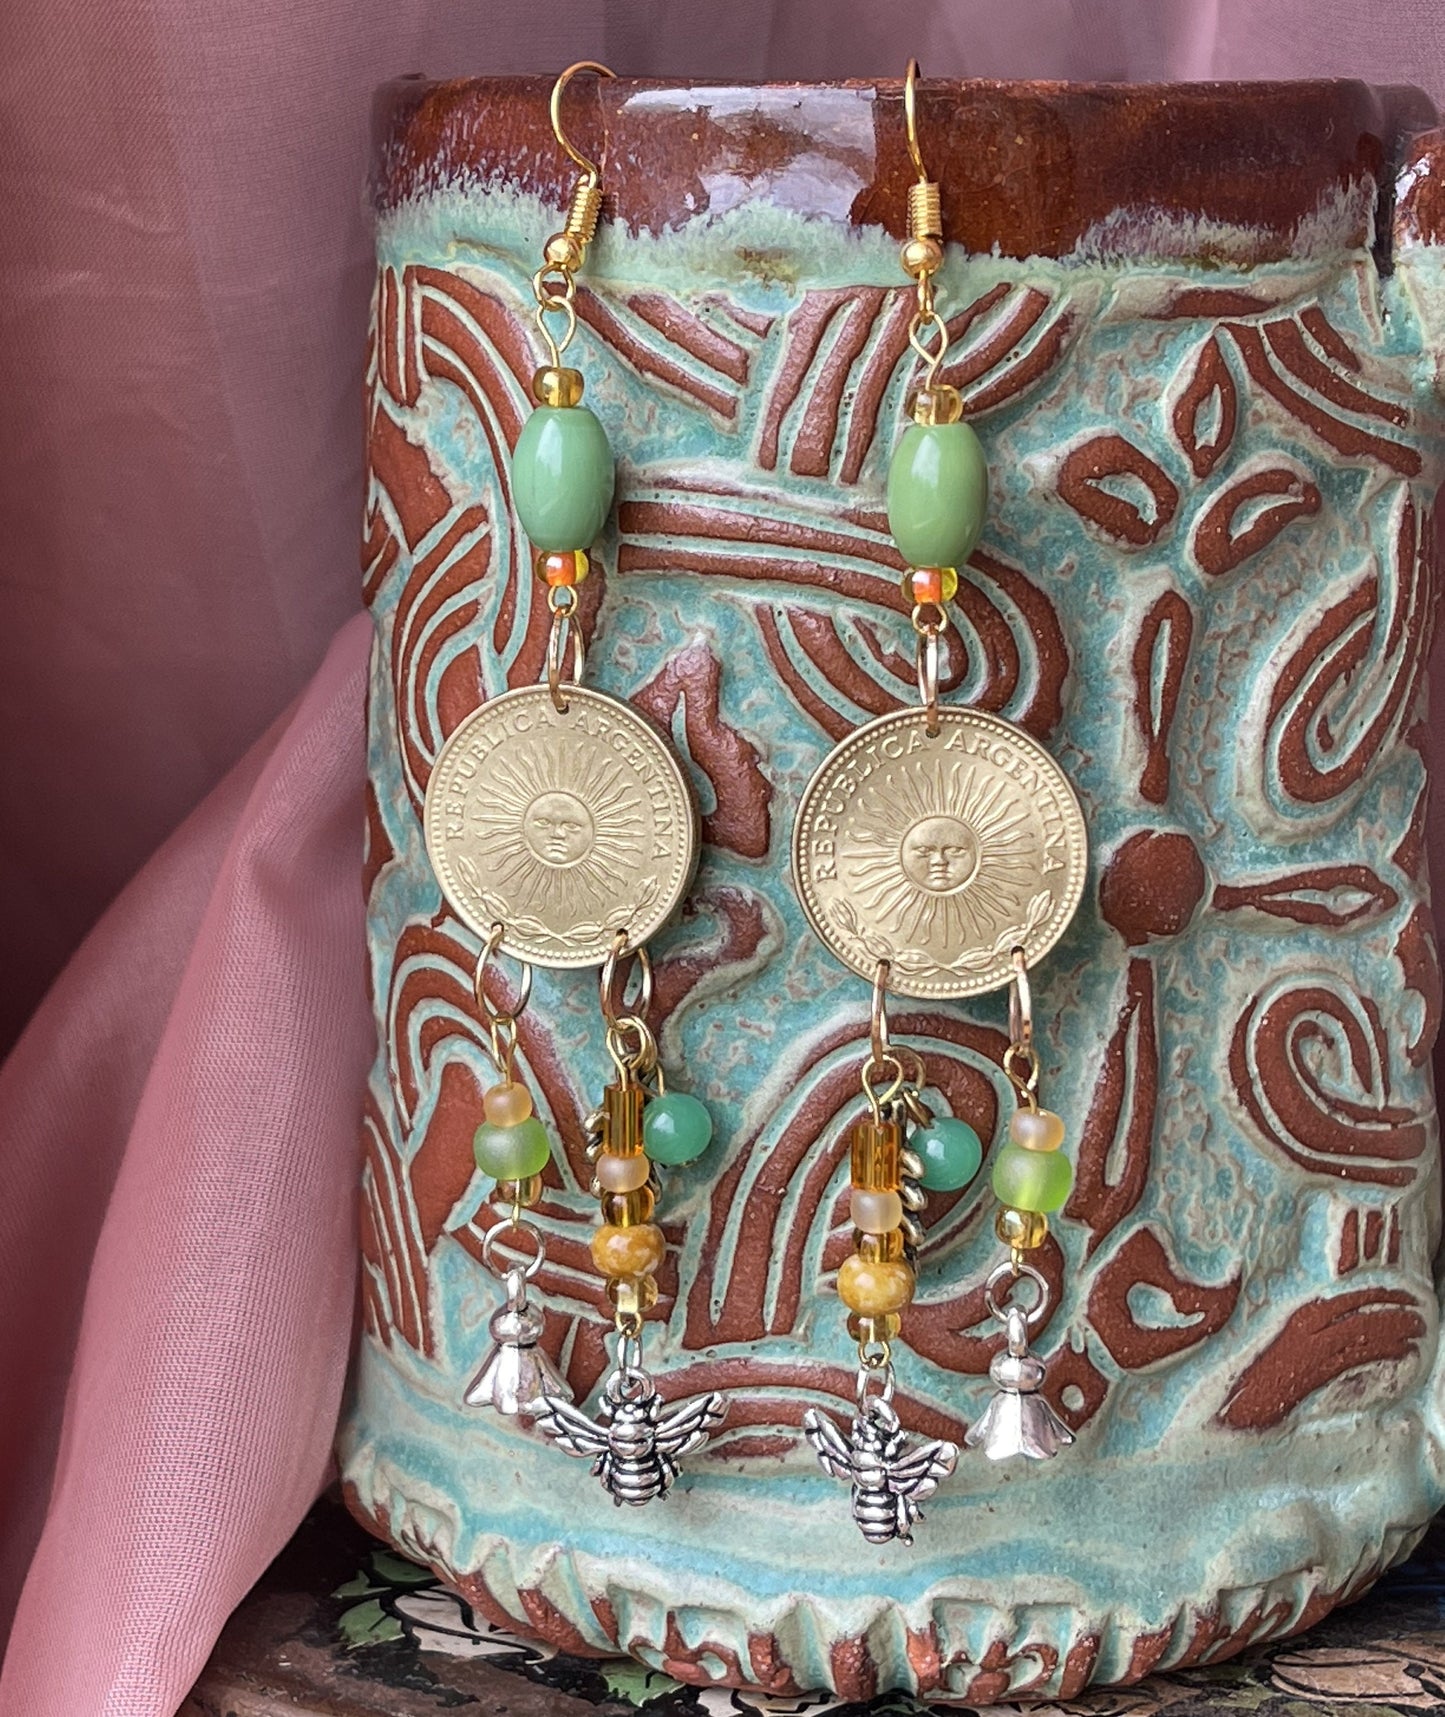 Bee & sun long dangle earrings–Gold, silver plated designer jewelry–realistic bee flower coin charms–vintage glass beads–green, gold, orange